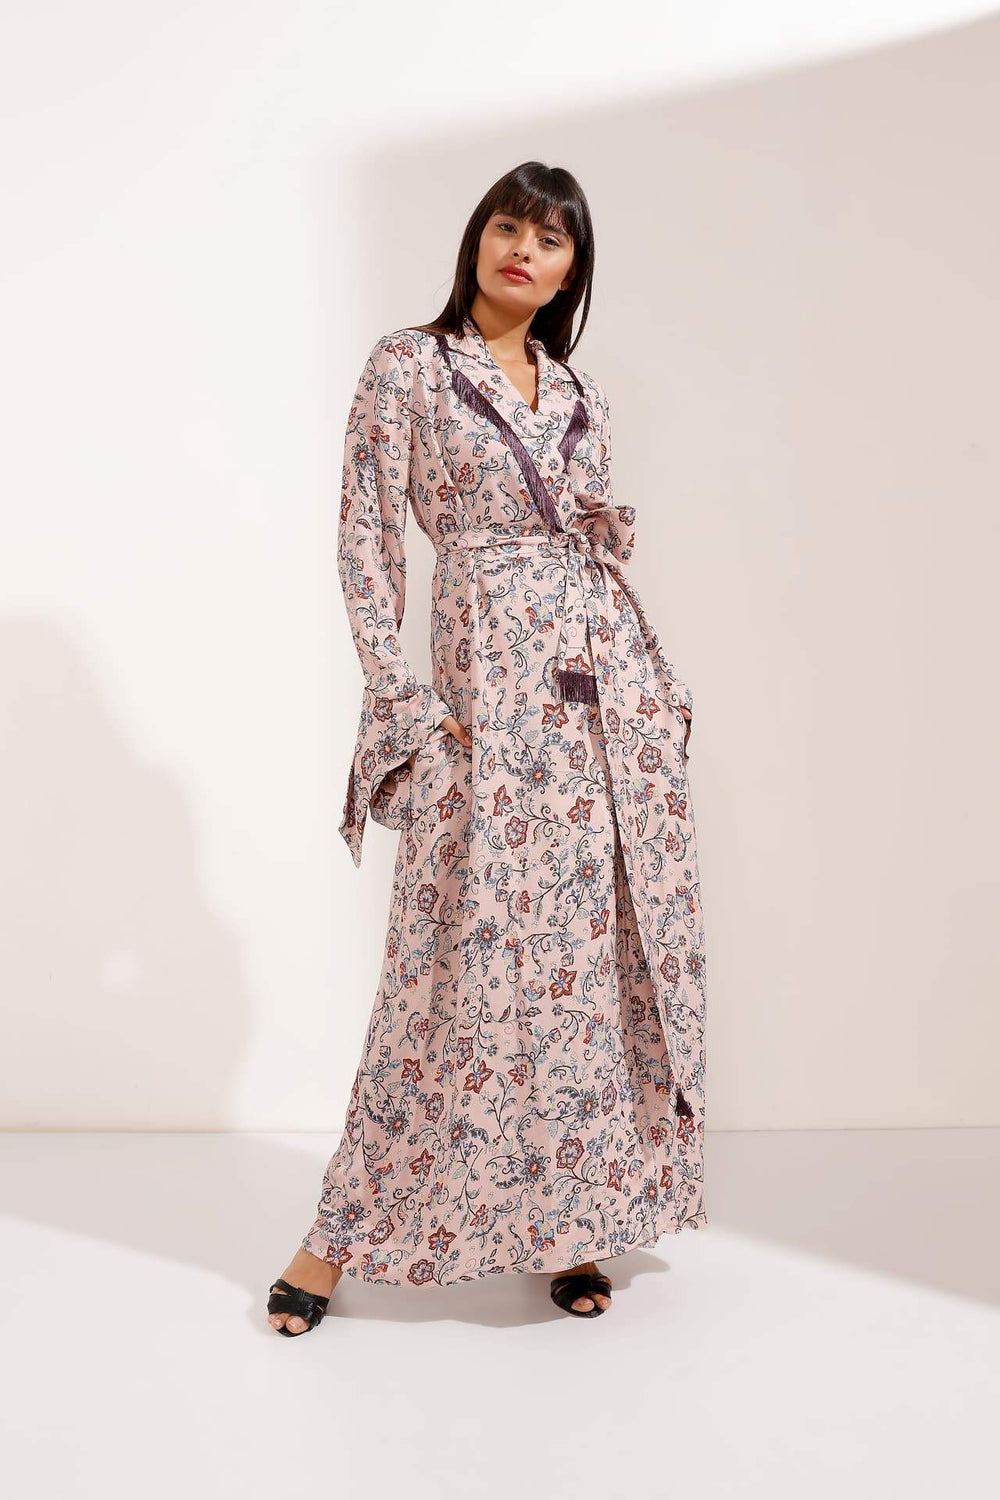 Store WF Pink Floral Maxi Dress with Tassel Collar and Belt Modest Wrap Front Loose Fitting Dress with Long Sleeves in 100% Viscose